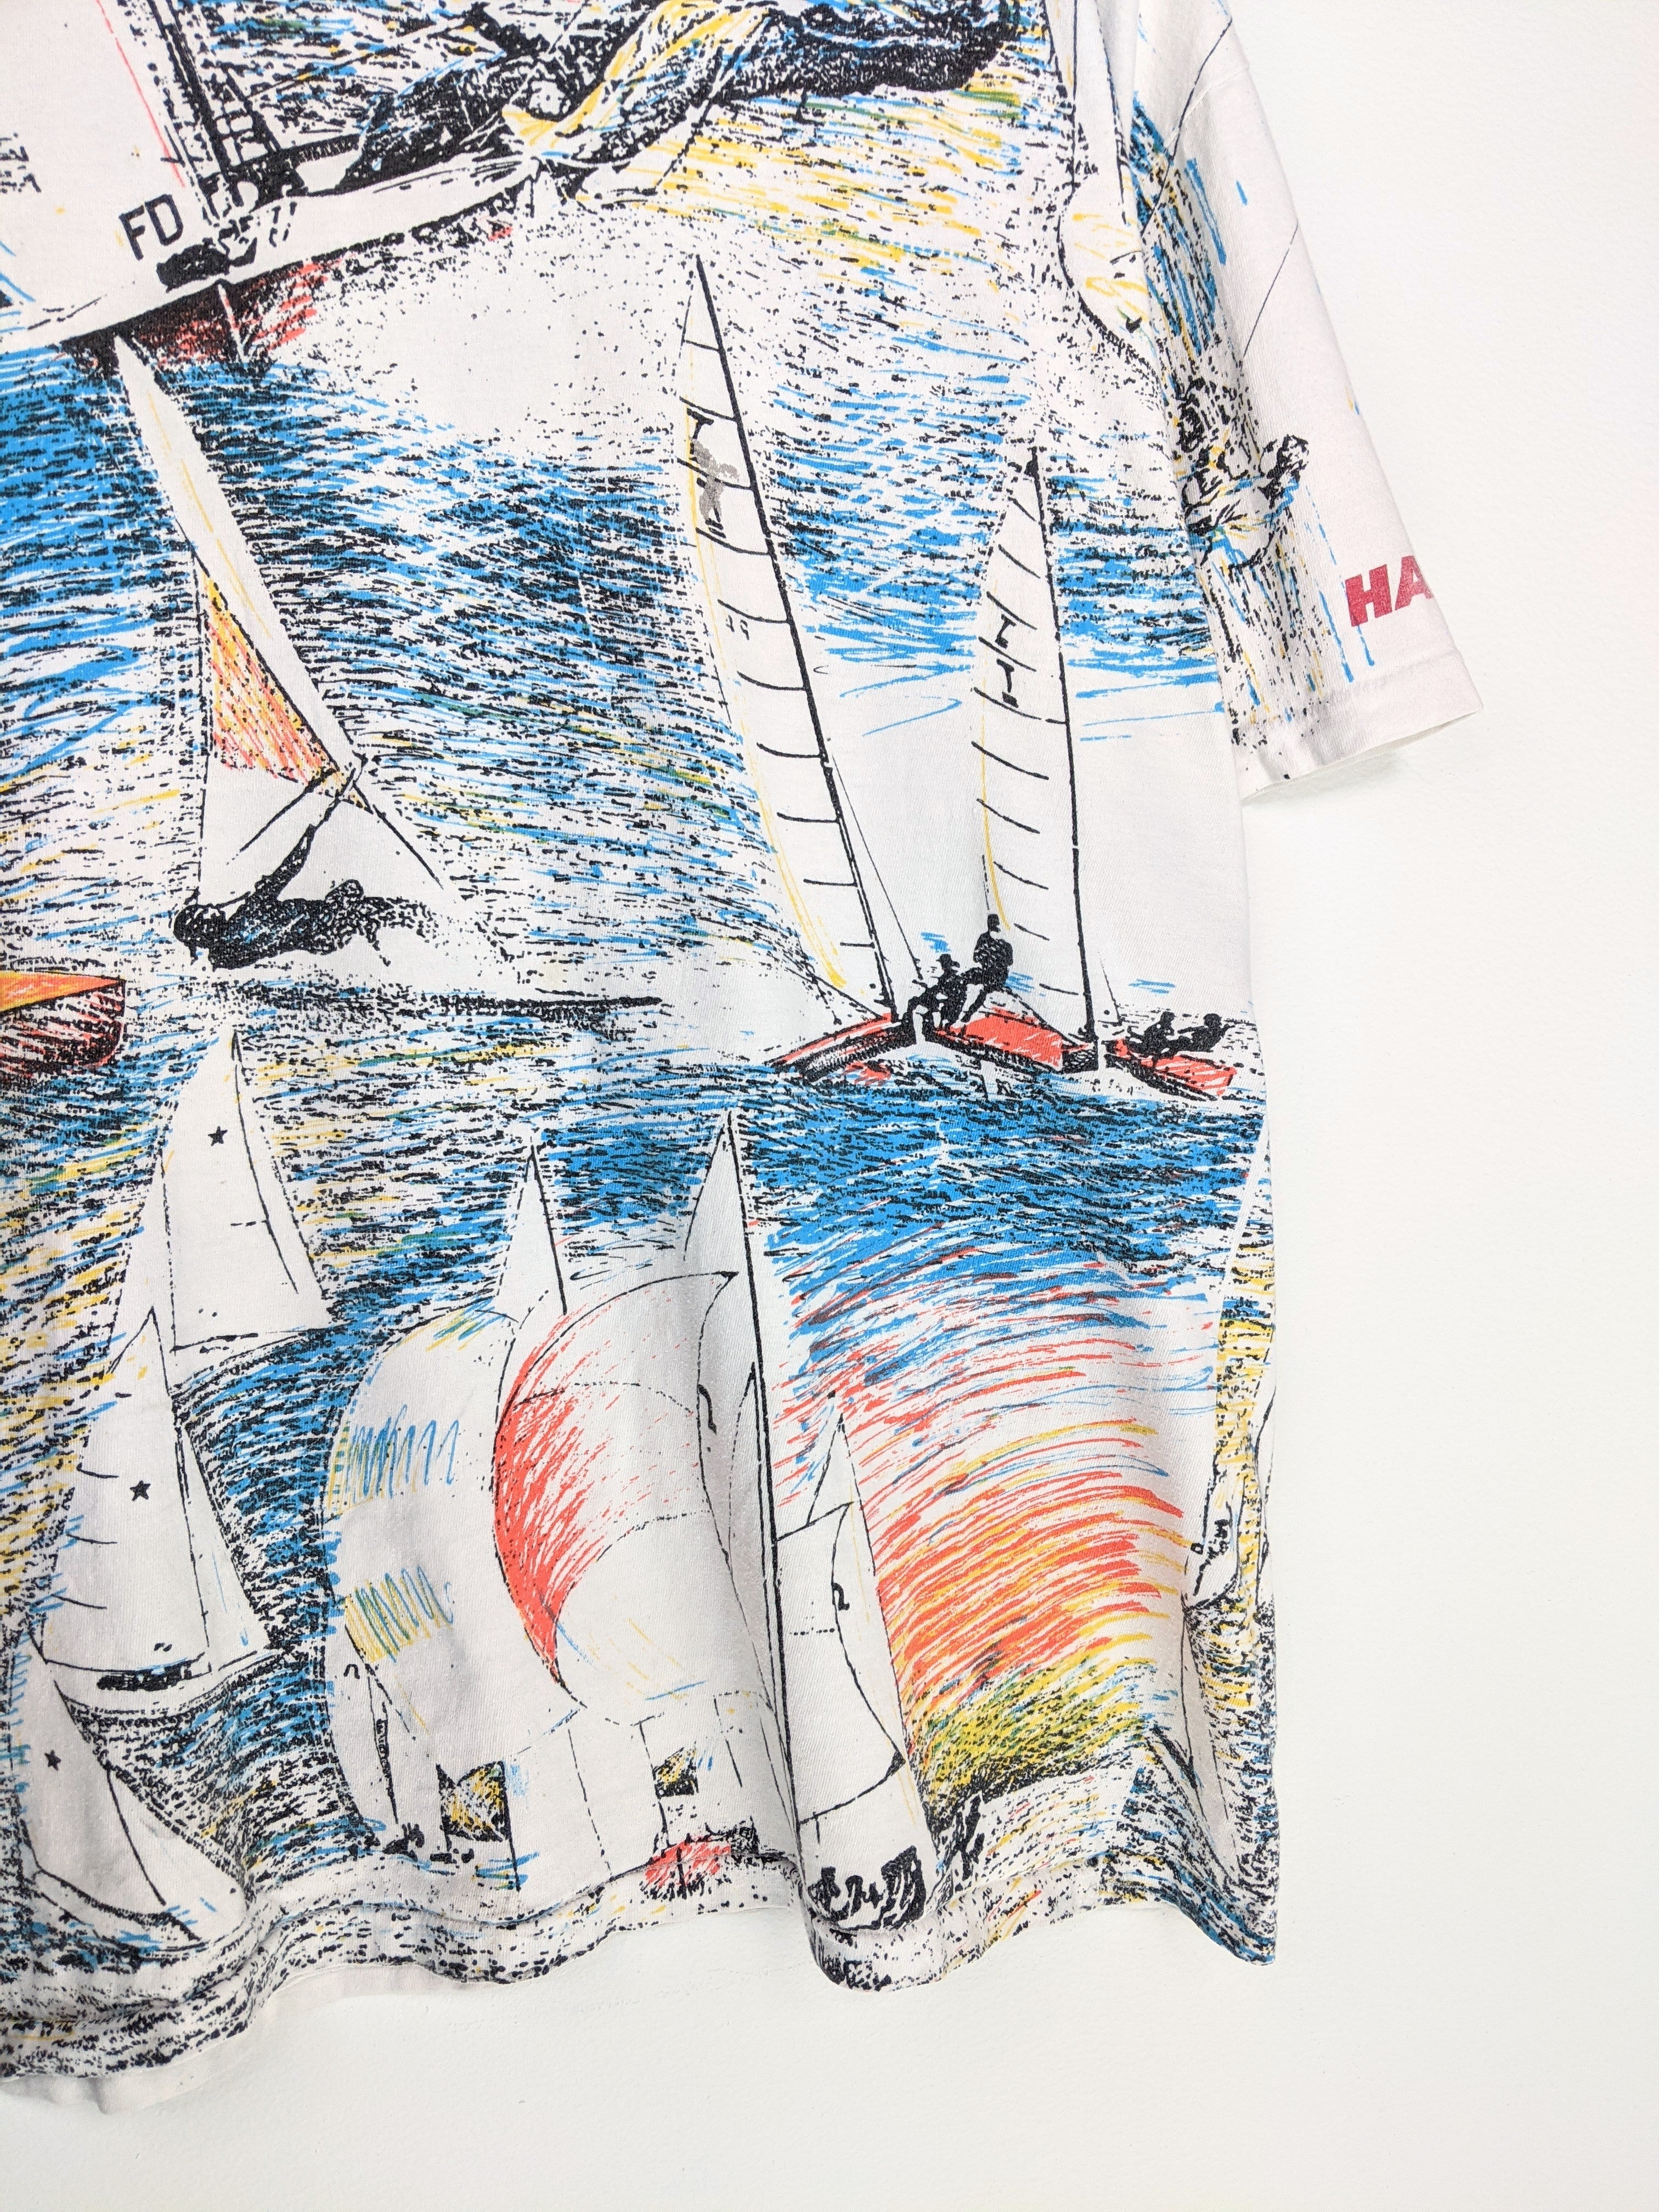 All Over Print Sailing Tee (L)